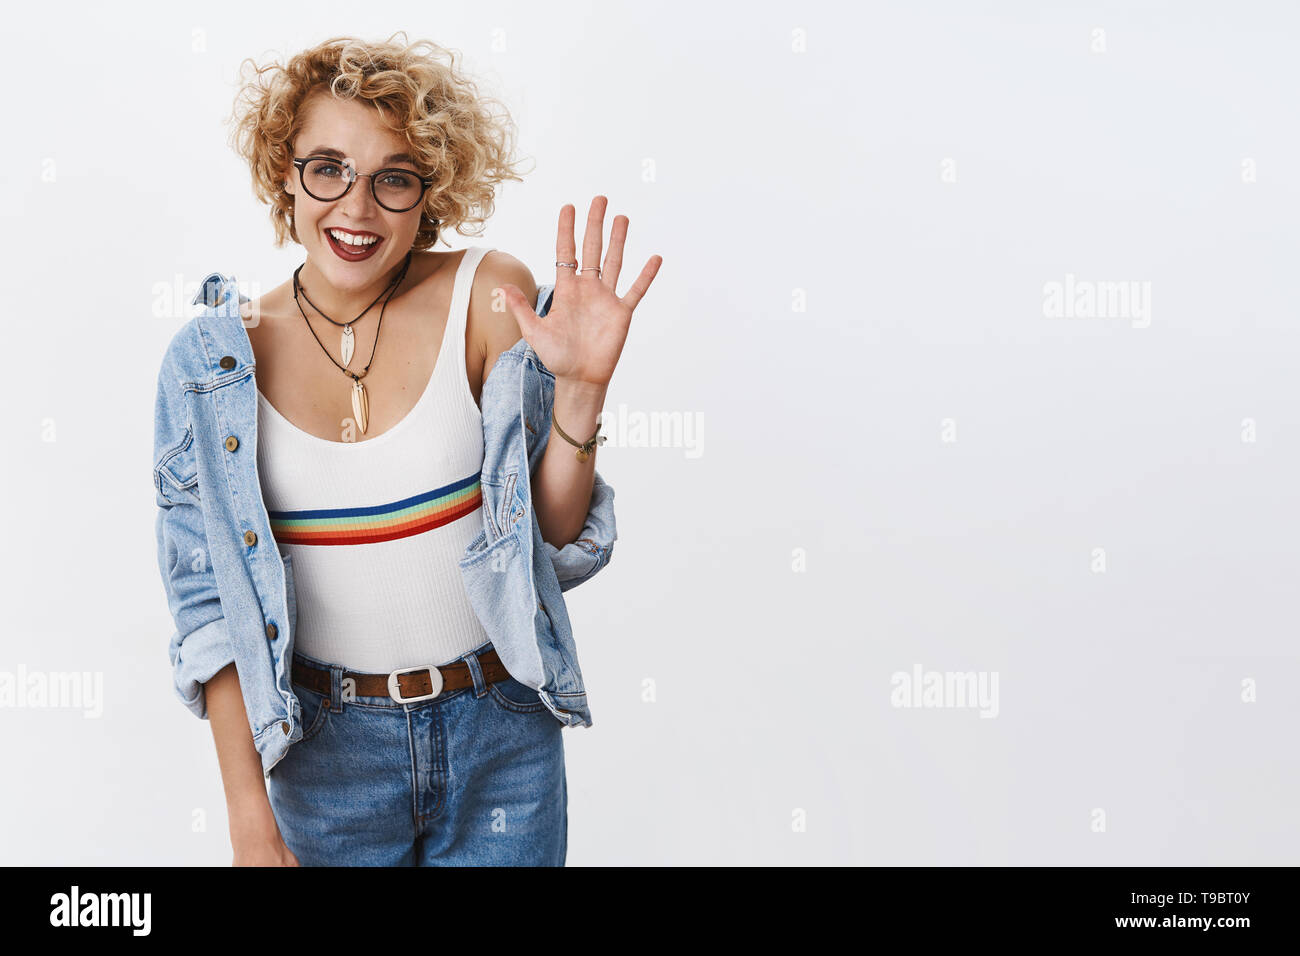 Five stars to your product. Indoor shot of enthusiastic stylish female blonde with glasses and pierced nose raising palm and smiling broadly giving Stock Photo